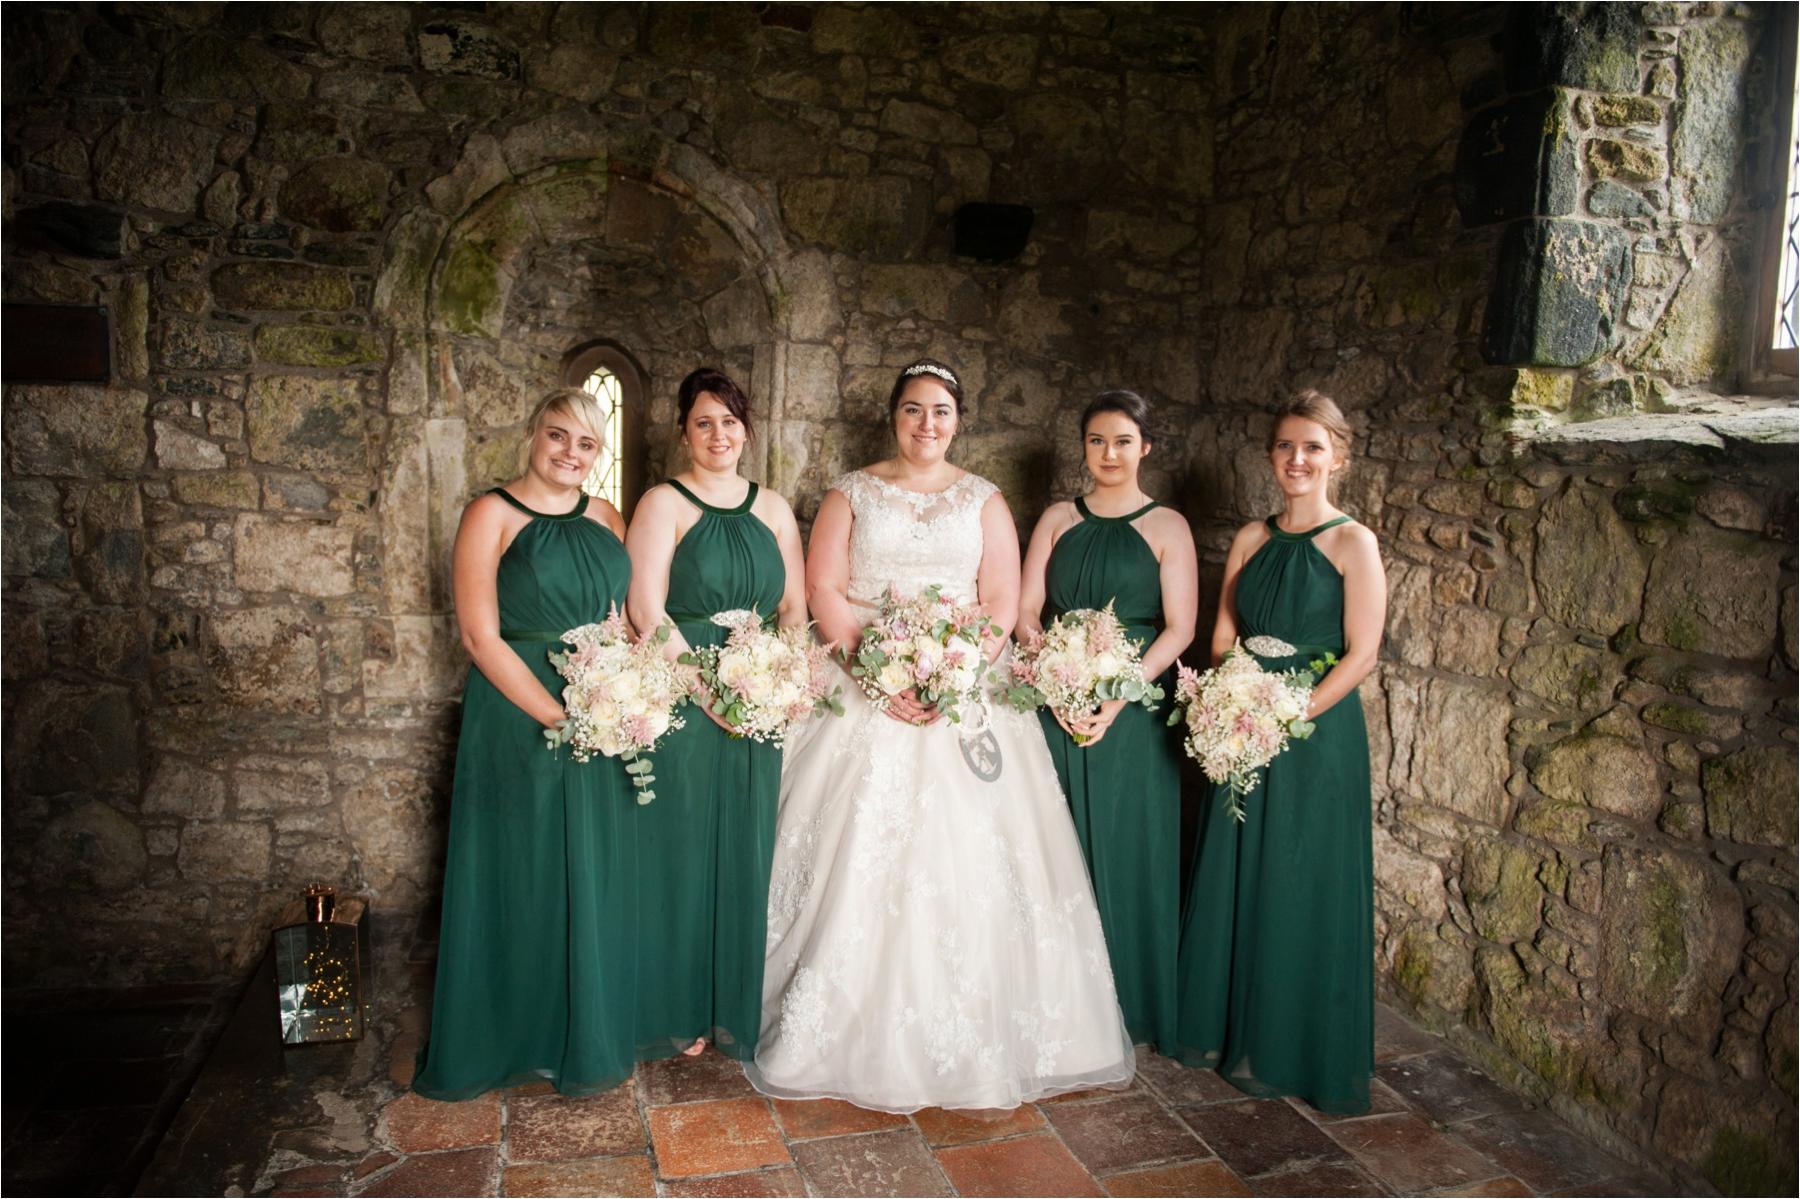 The bride and bridesmaids wearing emerald green pose for a formal portrait against a stole wall in the historic St Clements Church, Rodel, Isle of Harris. 